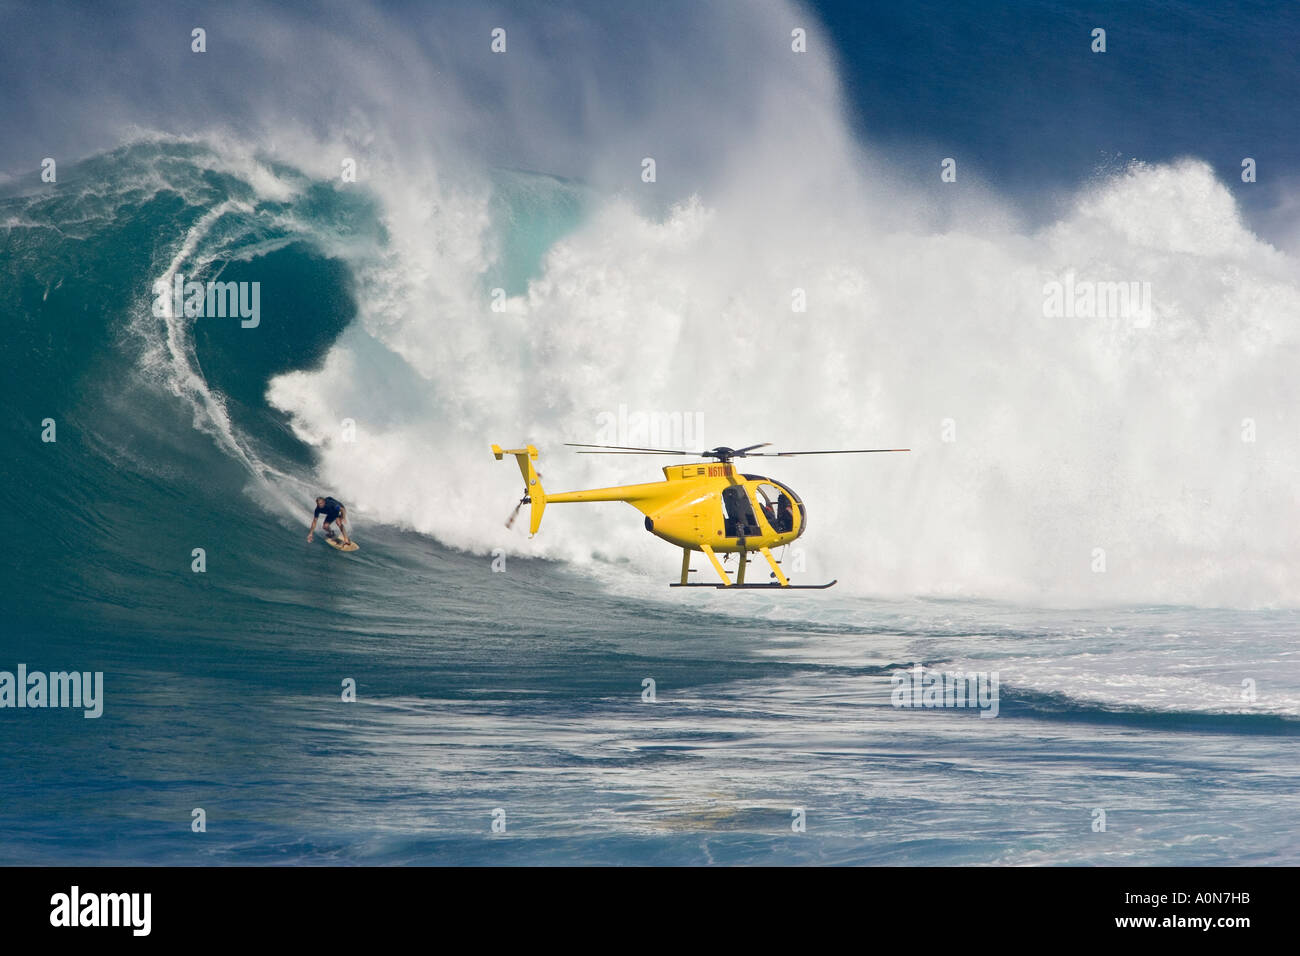 A helicopter filming tow in surfer, Laird Hamilton at Peahi, (Jaws) off Maui, Hawaii. Stock Photo